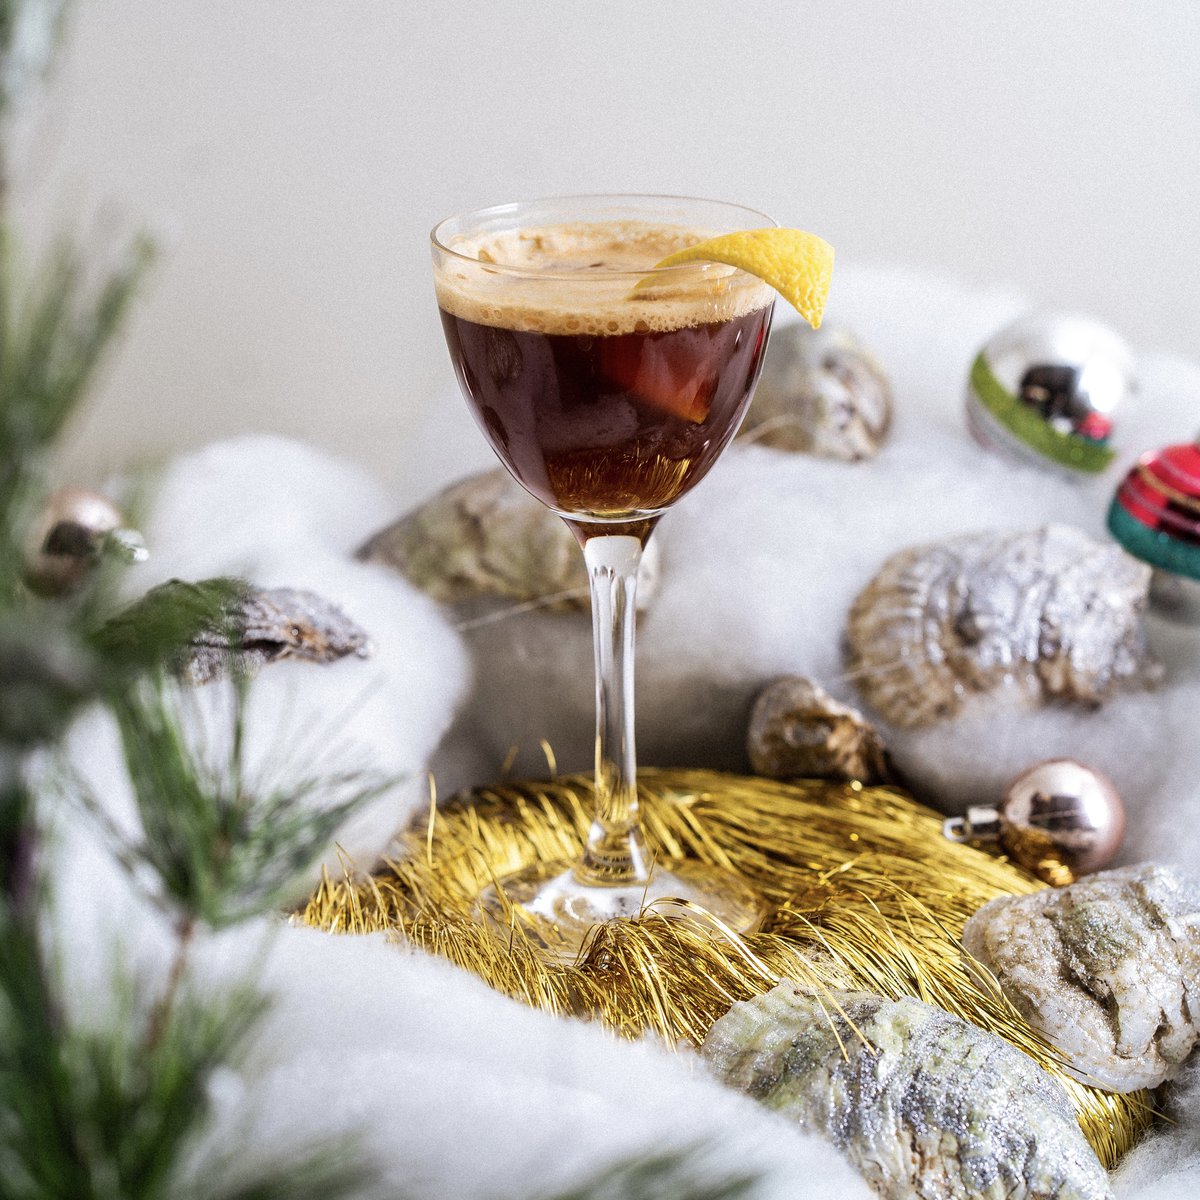 Tis the most wonderful time' Christmas Drink Toppers - Edible